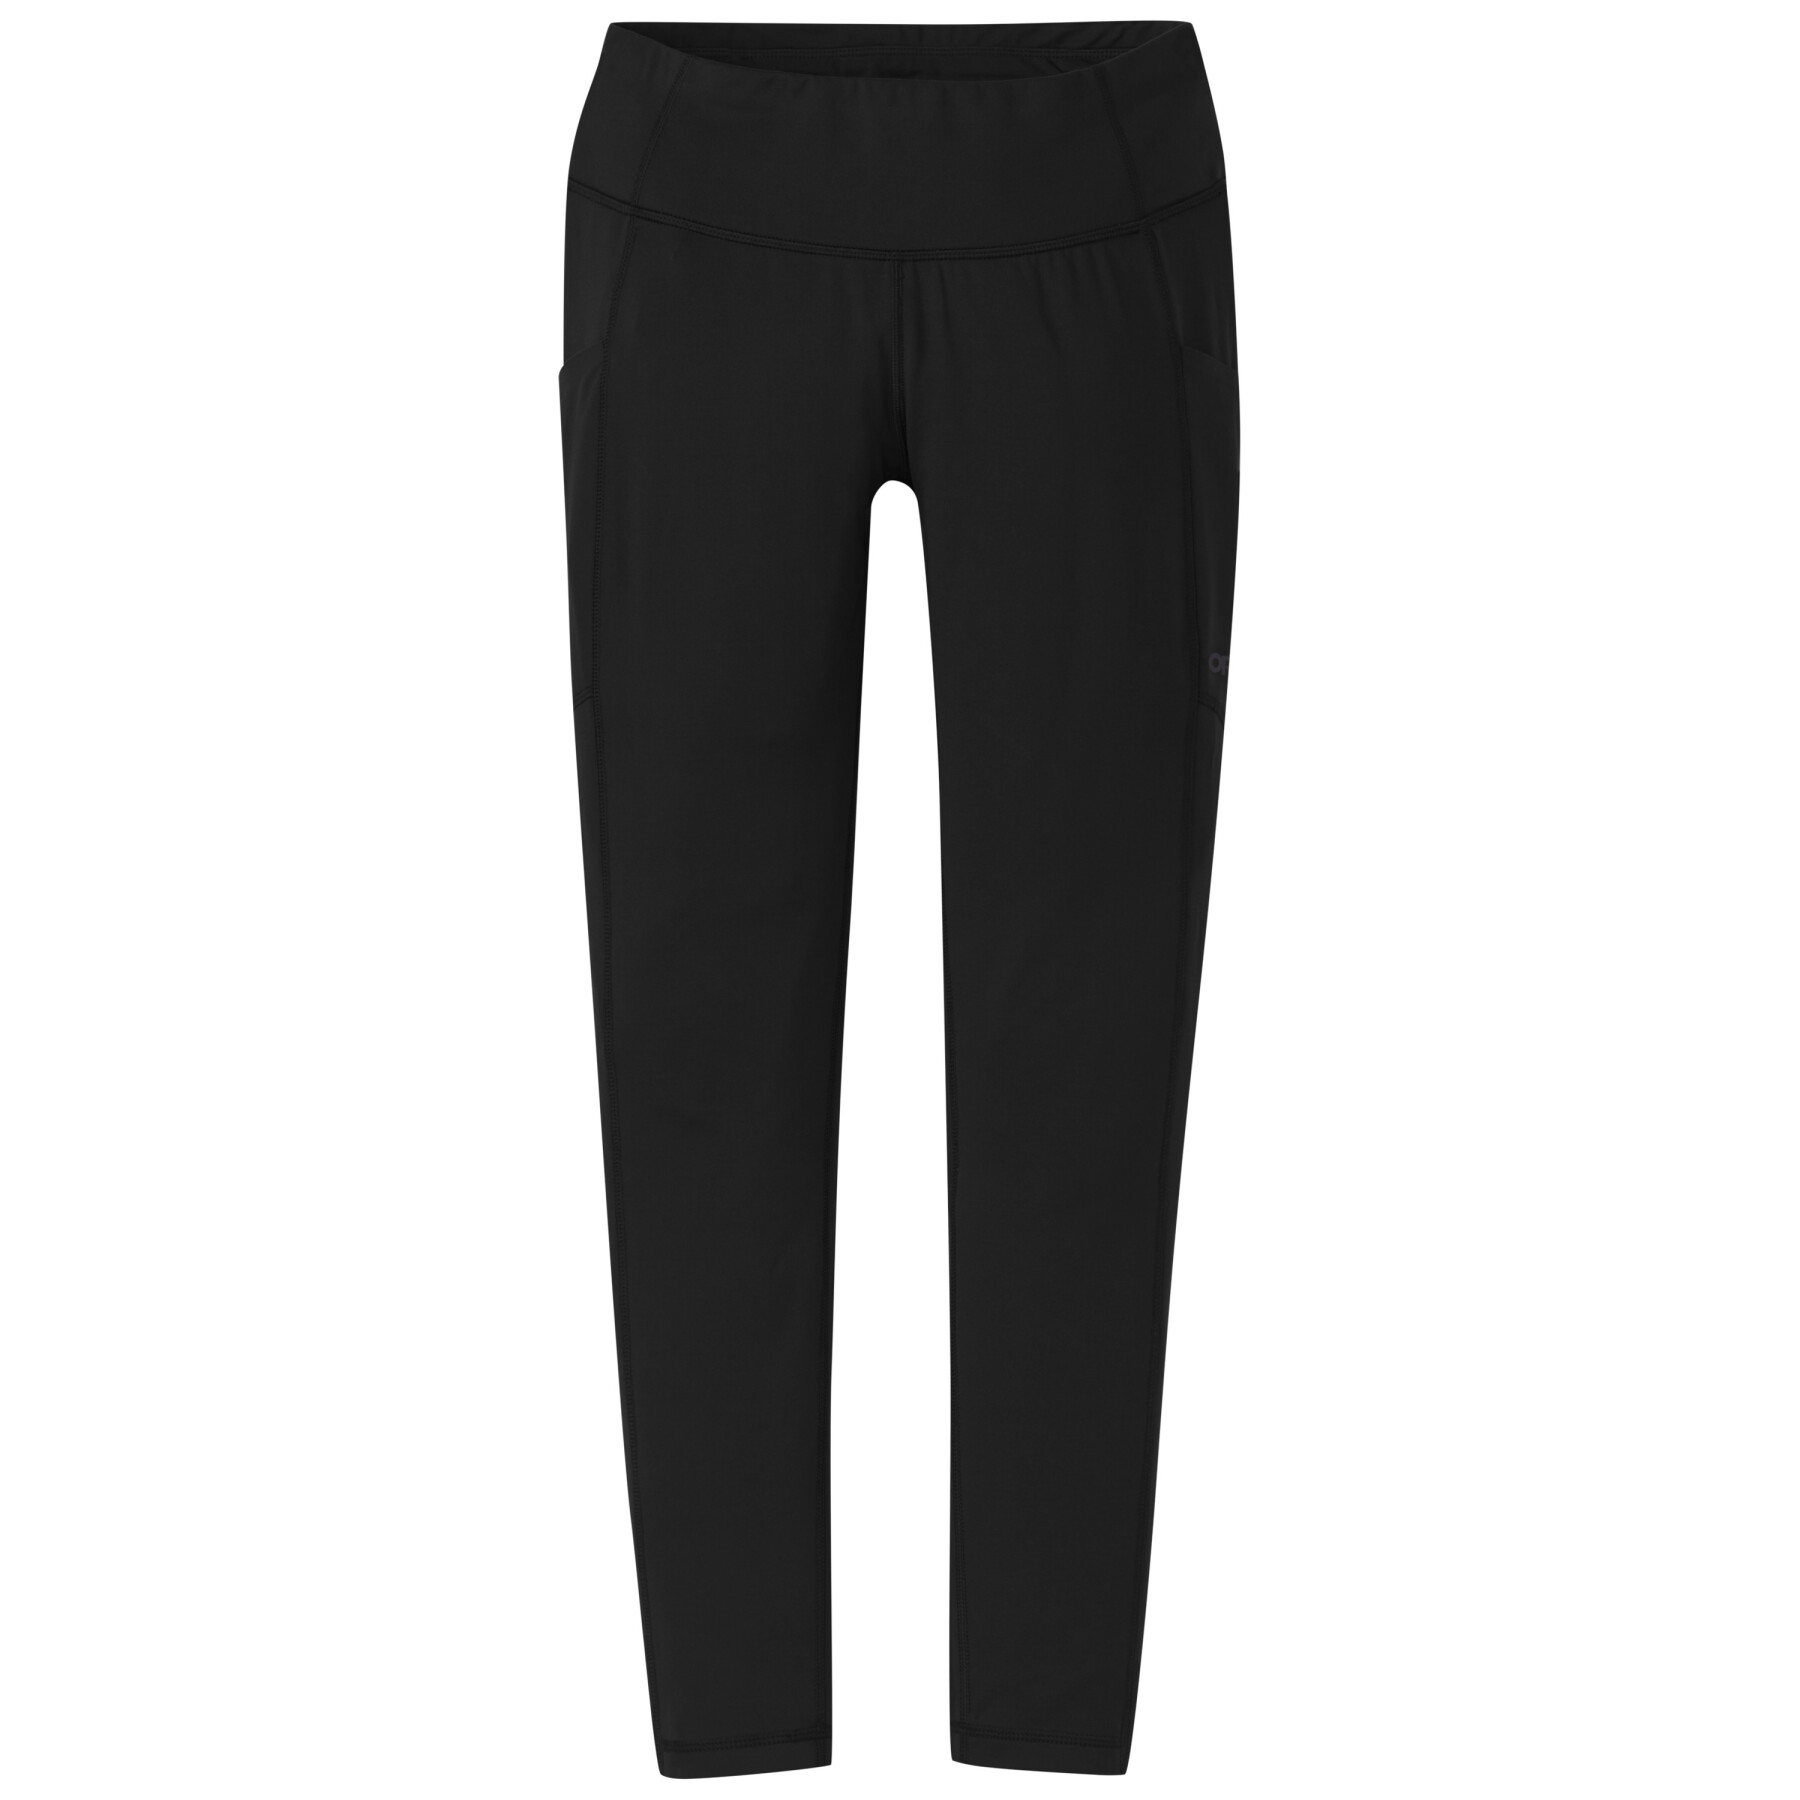 Legging 7/8 para mulher Outdoor Research Melody Plus